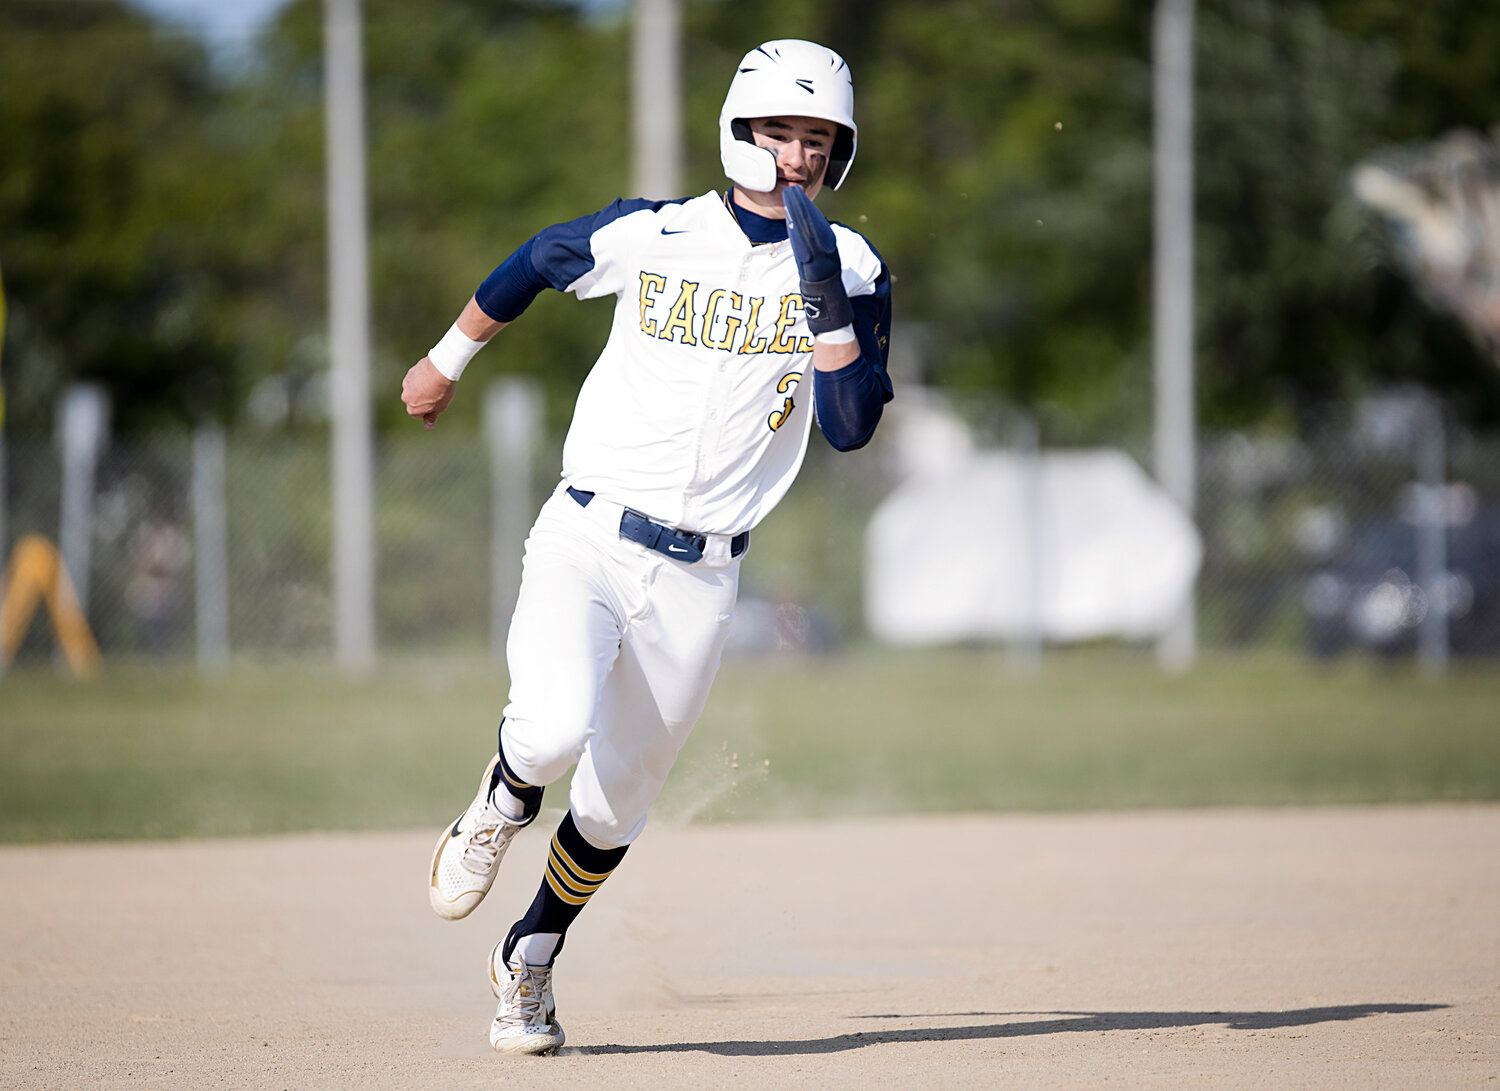 Quinn Murphy rounds the bases while competing against Mount St. Charles, Thursday.